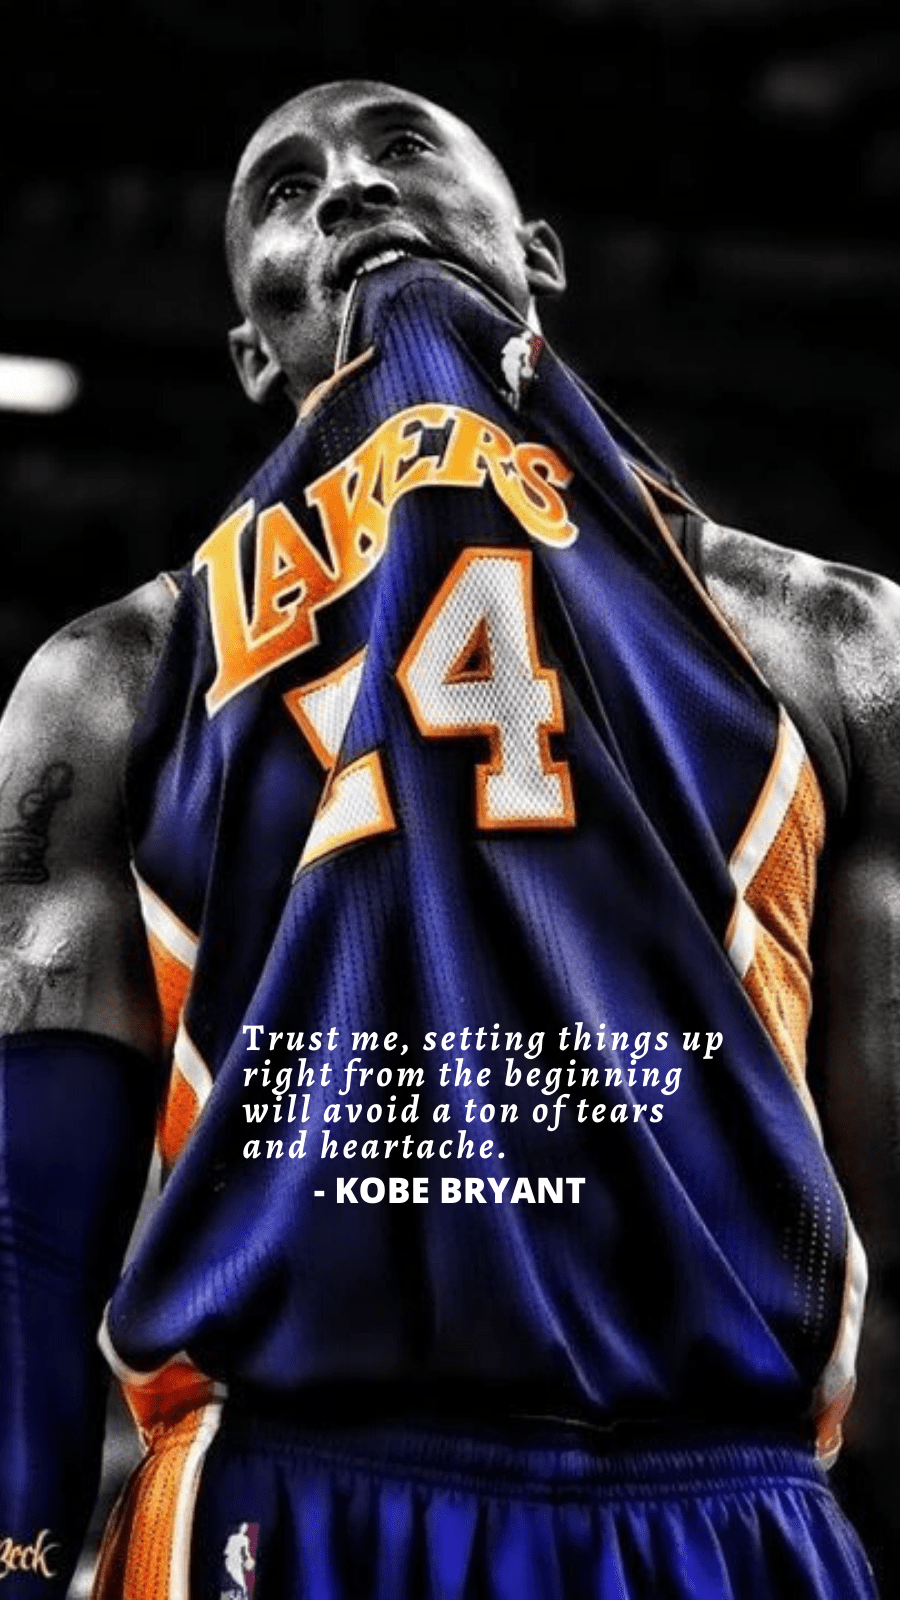 Kobe Bryant Quote Wallpapers - Wallpaper Cave